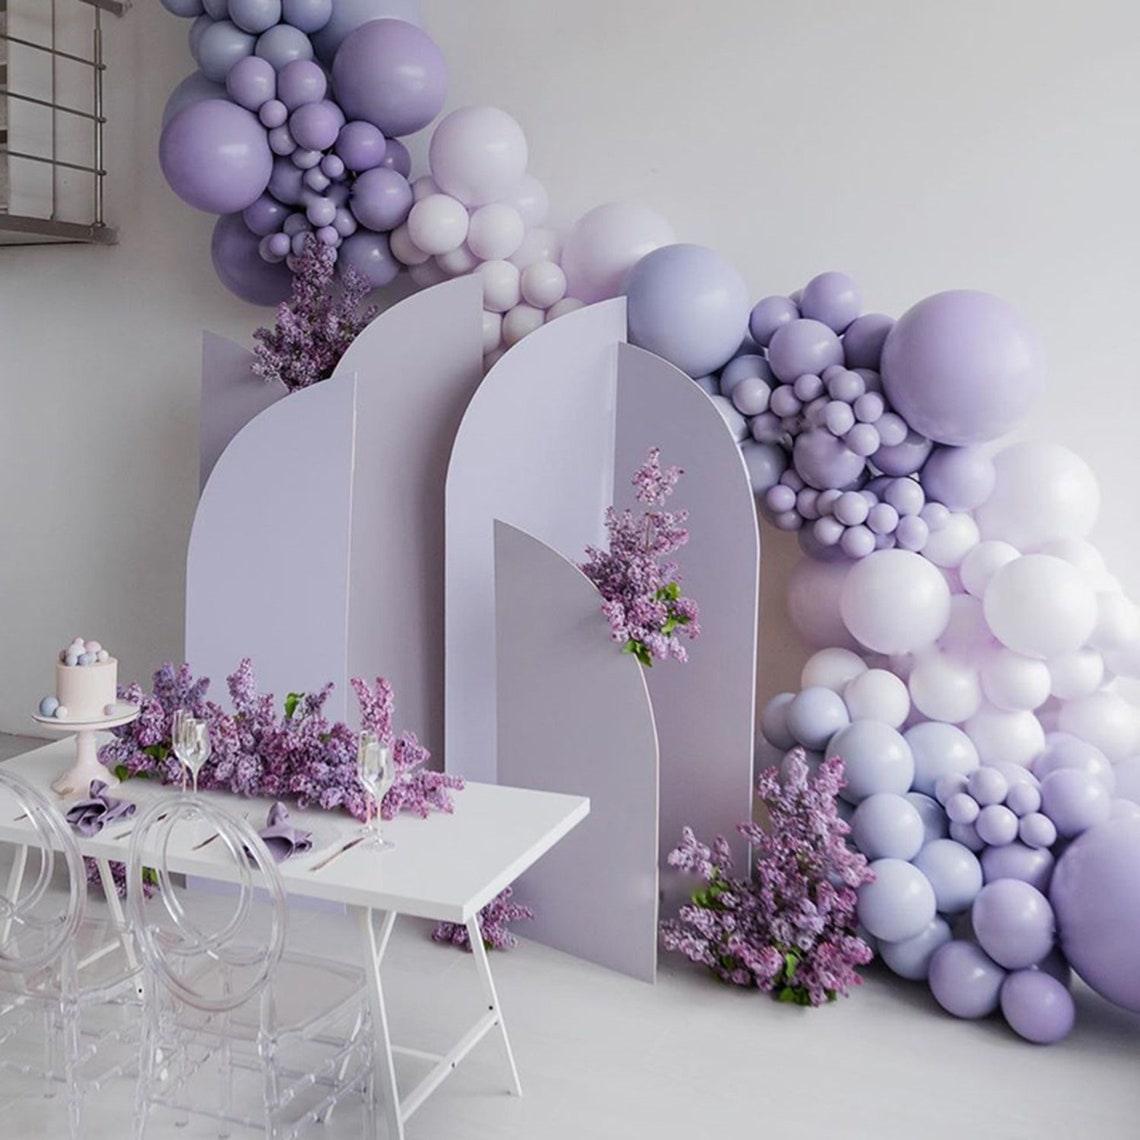 179 PCS Balloons Garland Arch Kit Retro Lilac Purple Double Layers Balloons For Wedding Birthday Baby Shower Party Decor - If you say i do